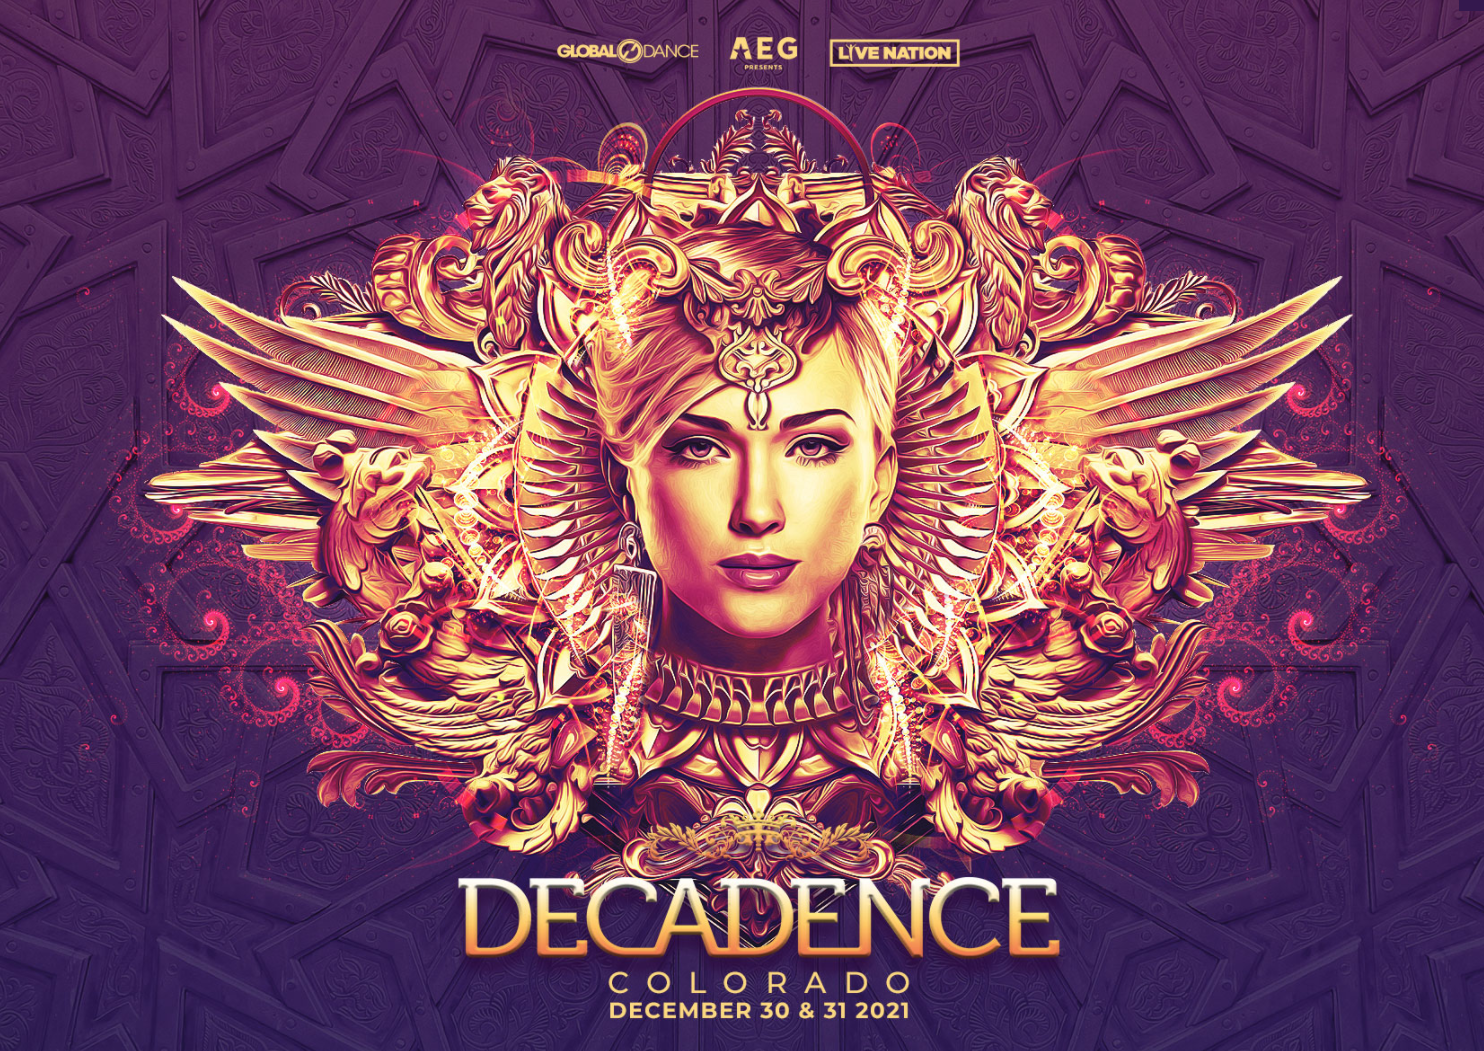 rooster magazine, decadence, new years eve, edm